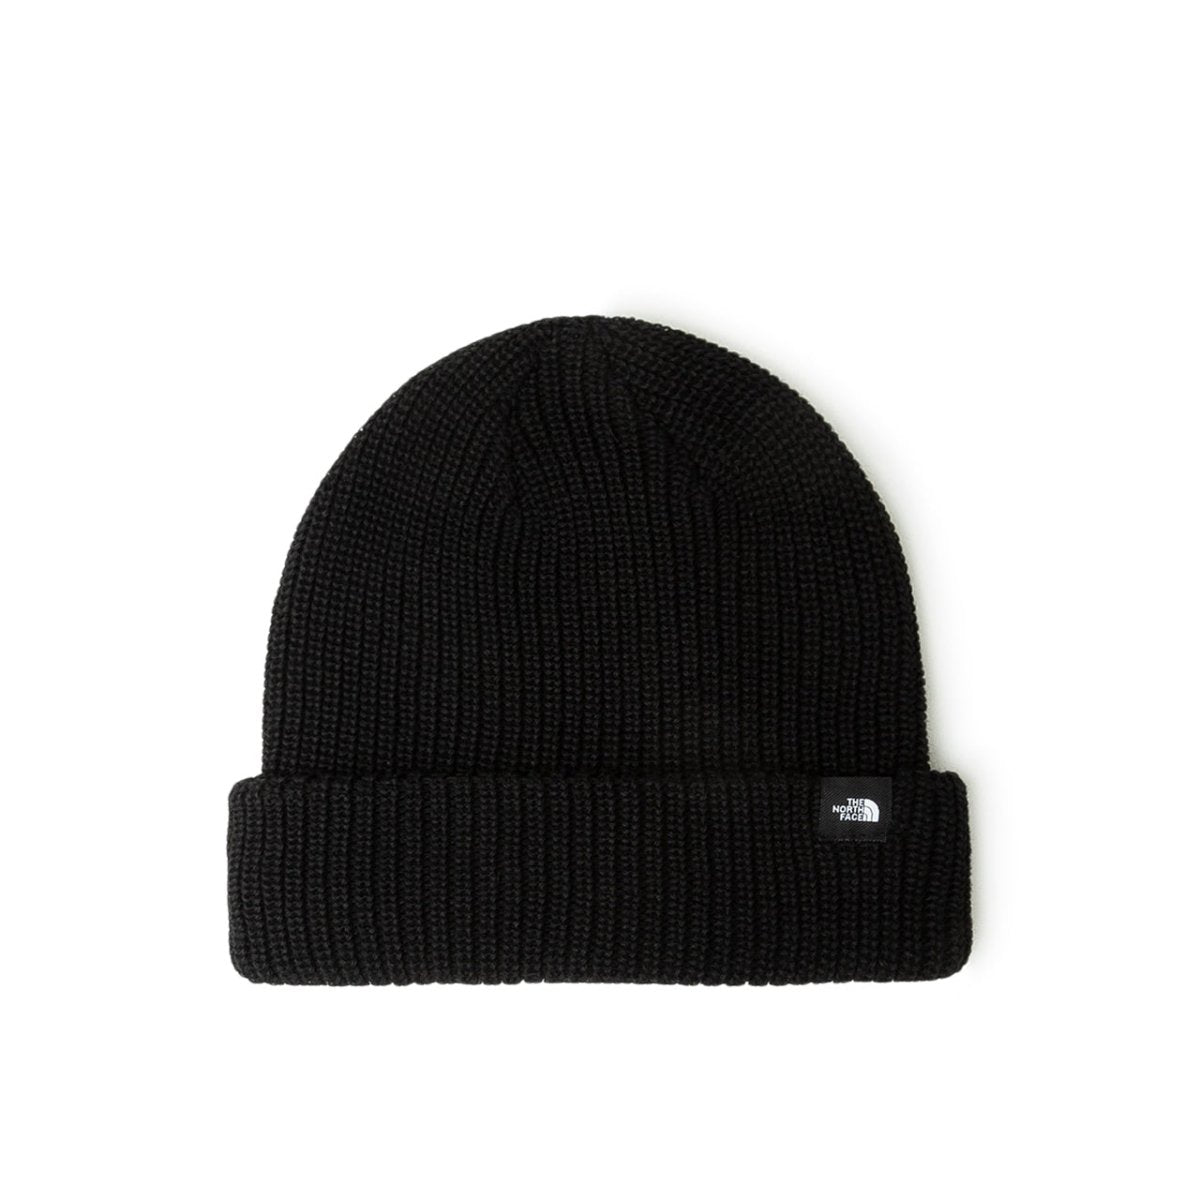 Image of The North Face Fisherman Beanie (Black)